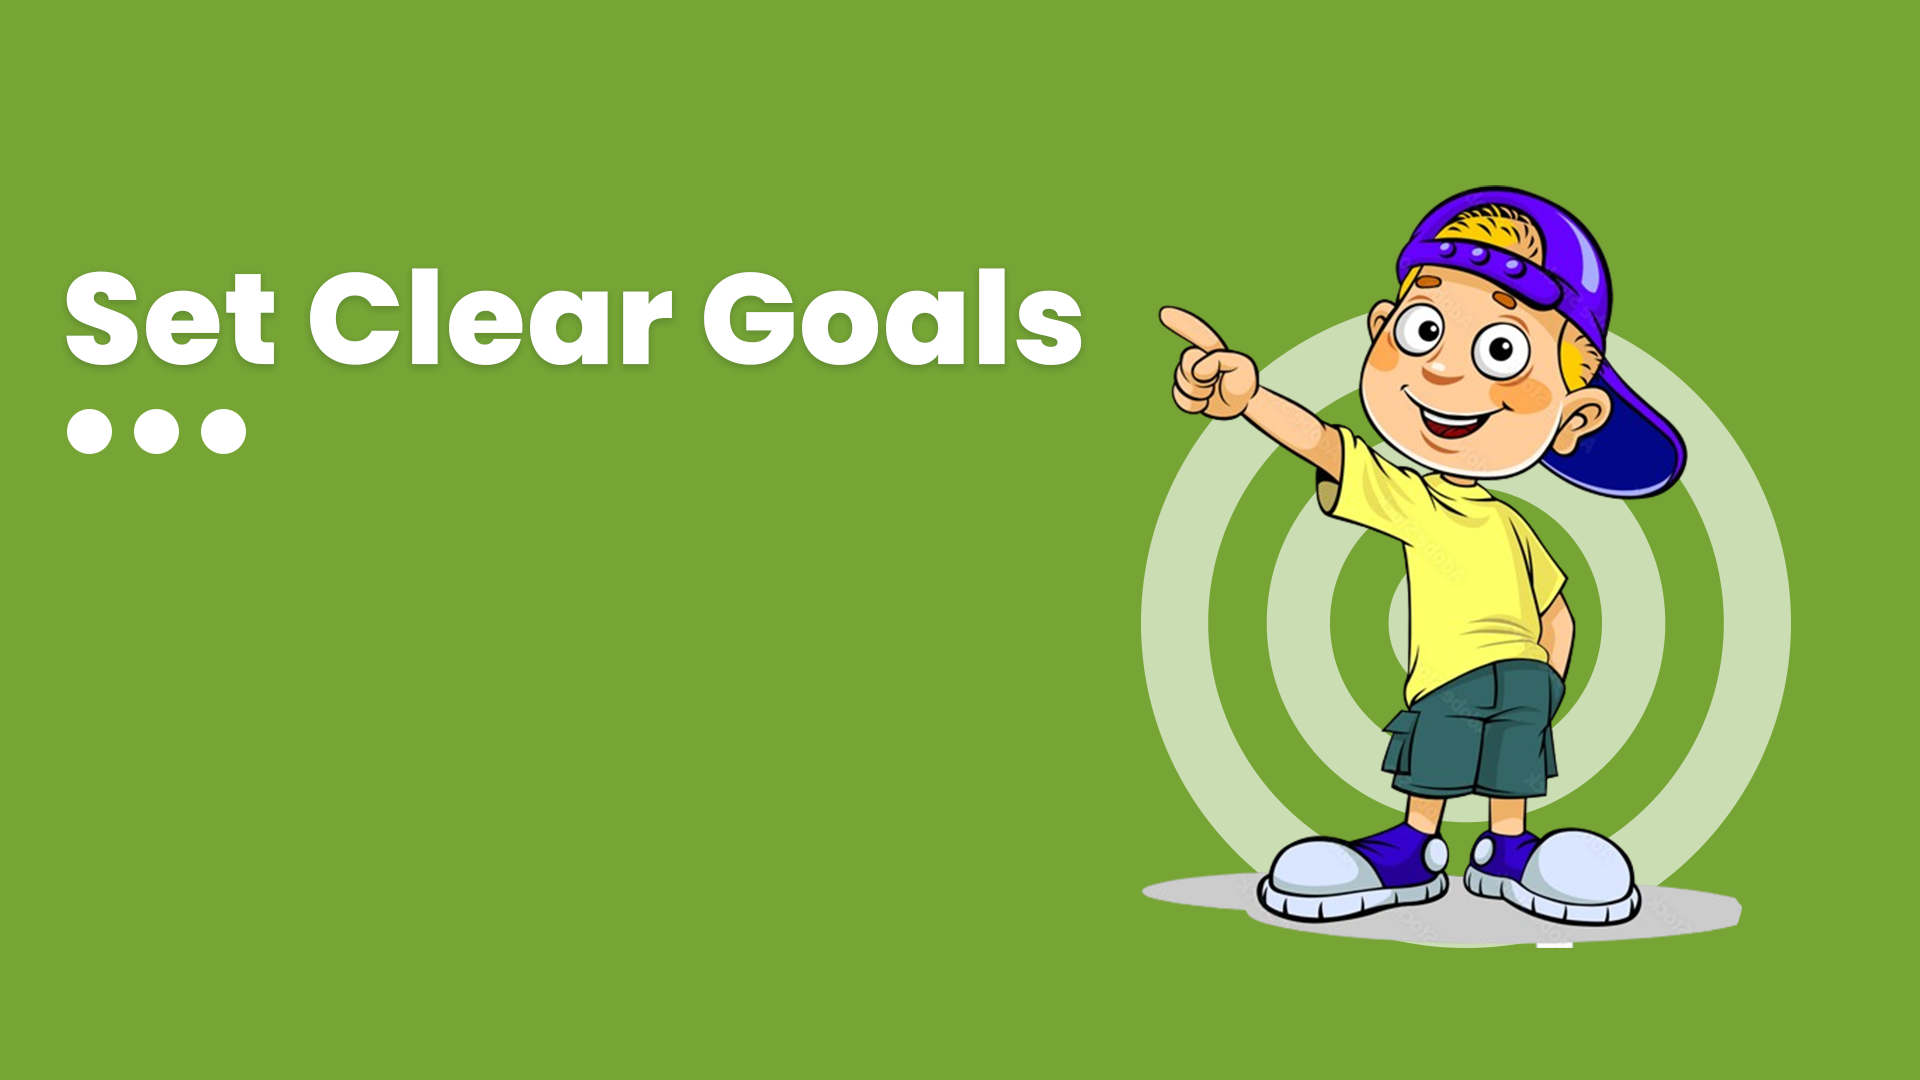 Step 1 of Developing a Social Media Strategy for your Business is Set Clear Goals